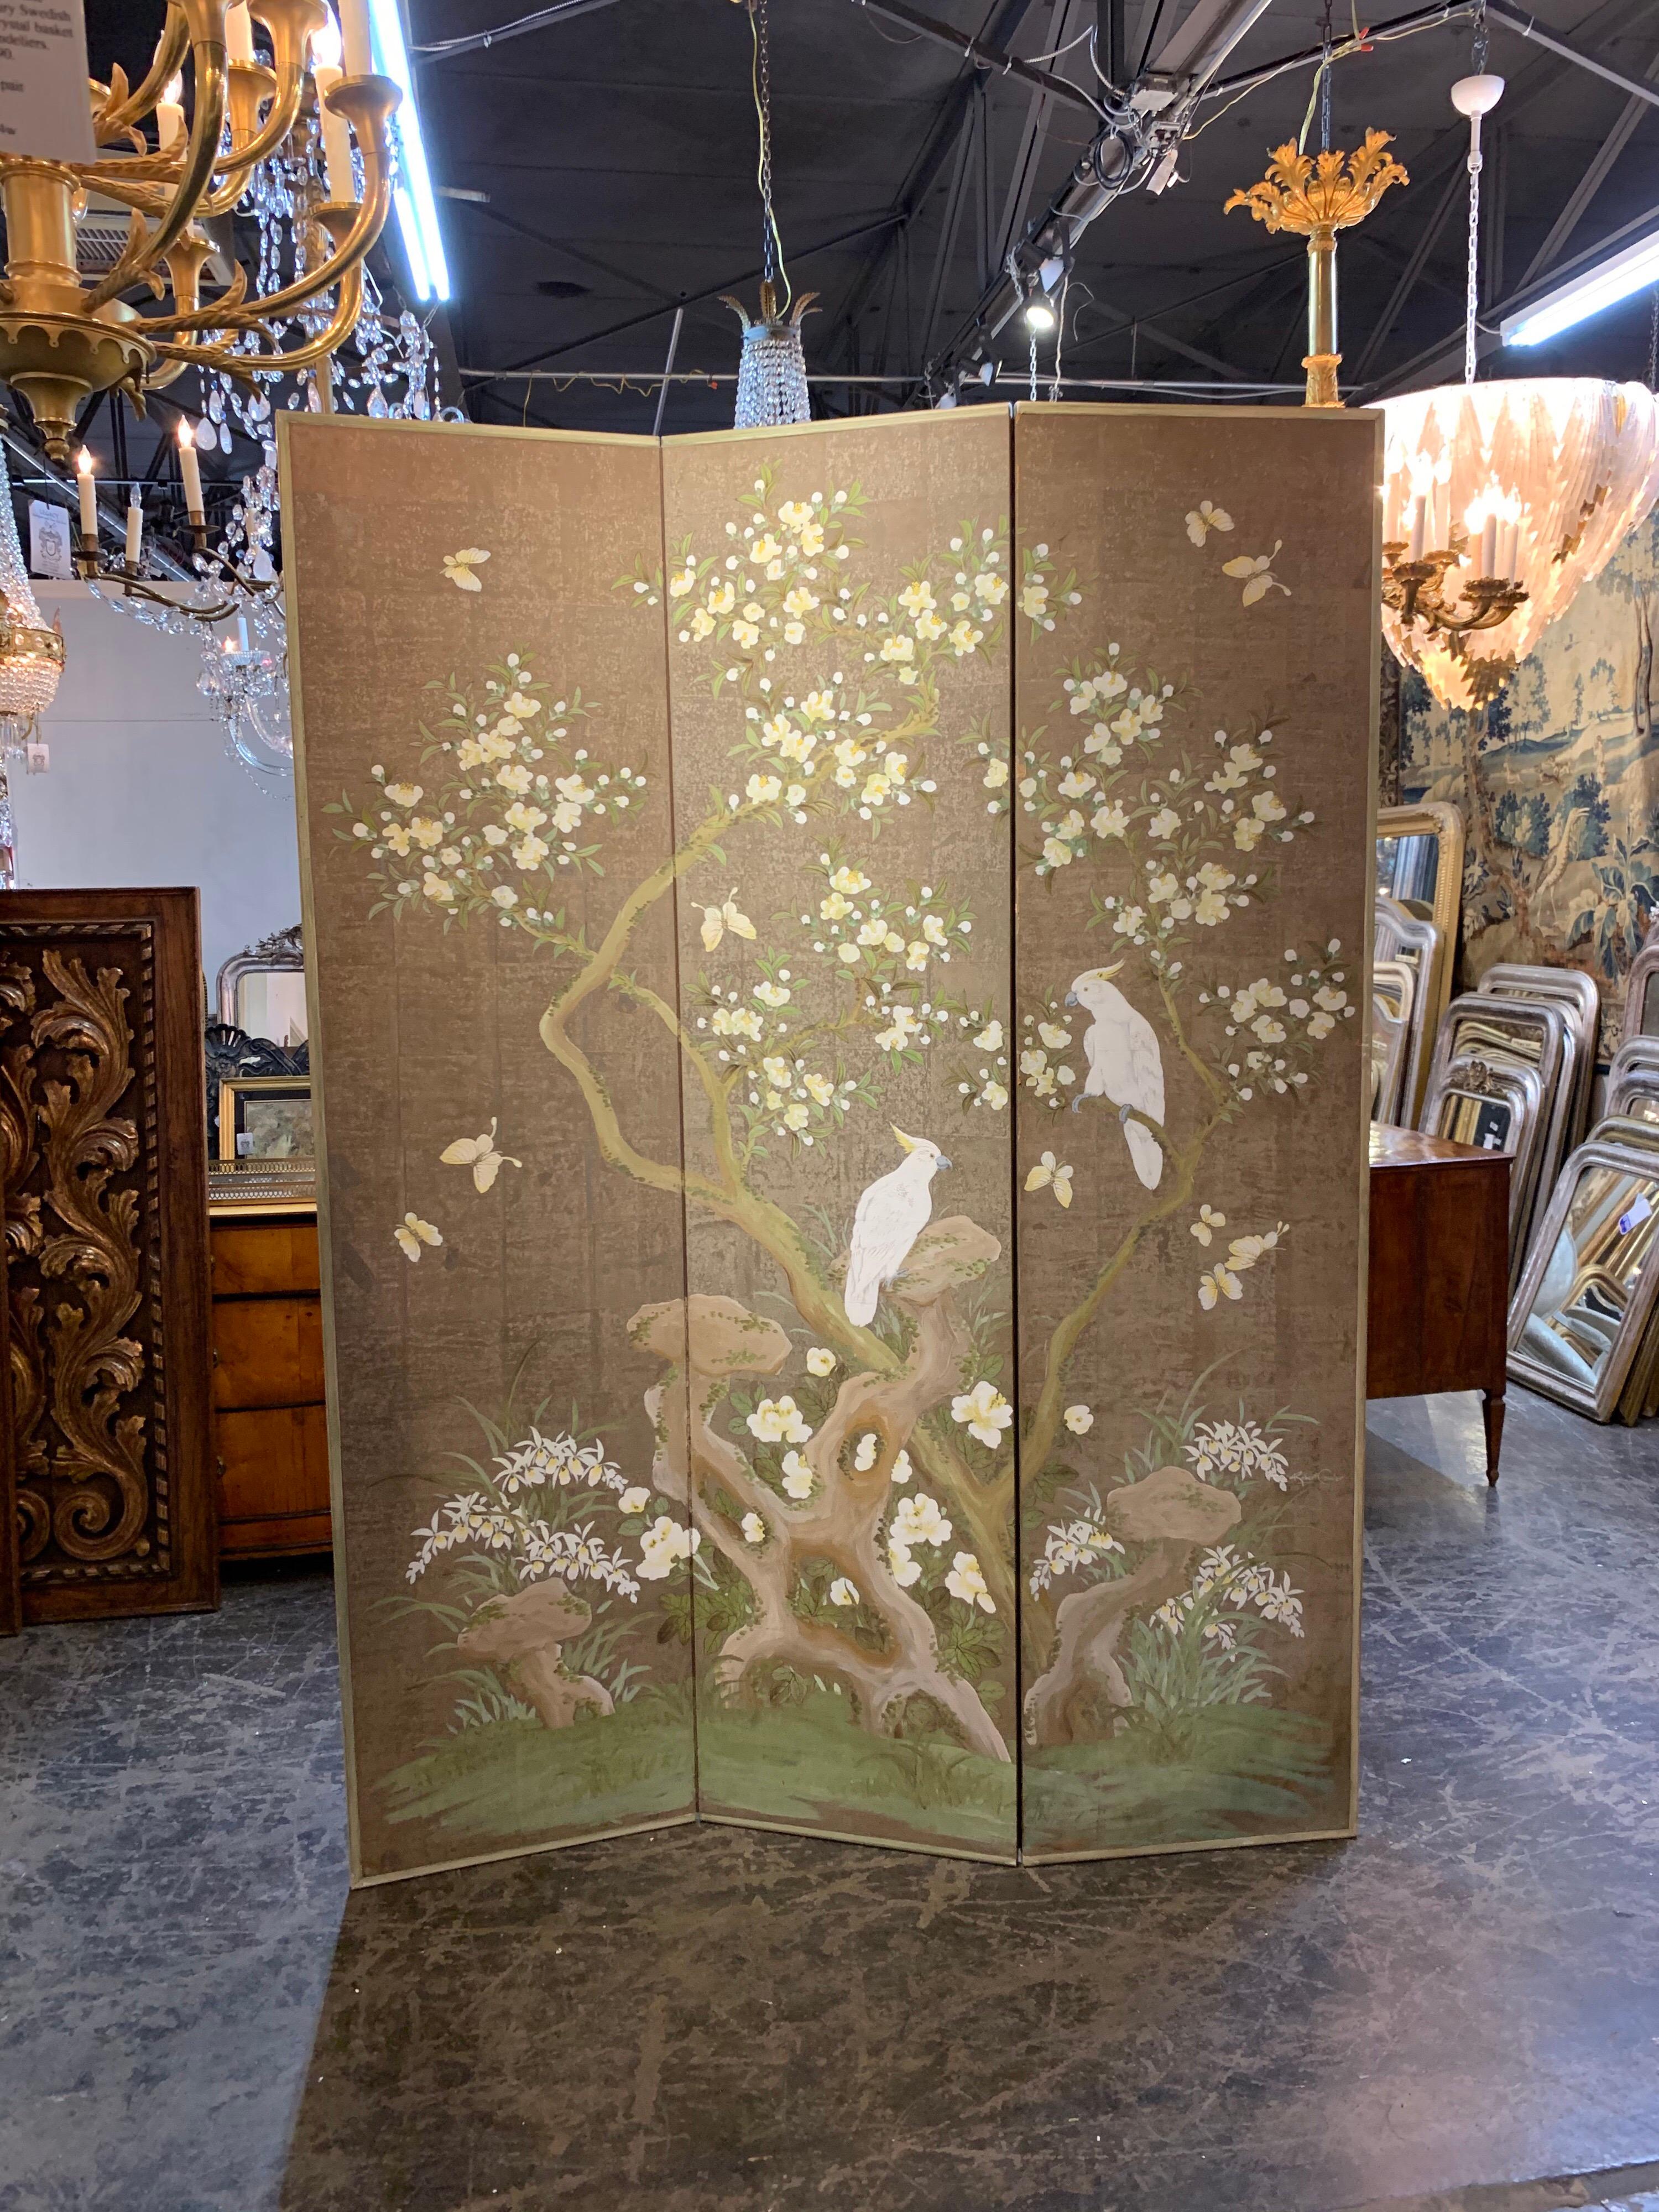 Splendid hand painted 3 panel screen by artist Robert Crowder. Beautiful images of flowers, birds and butterflies. Truly adds interest a fine home. So pretty! Note: There is a small tear on one of the screens that could be repaired.